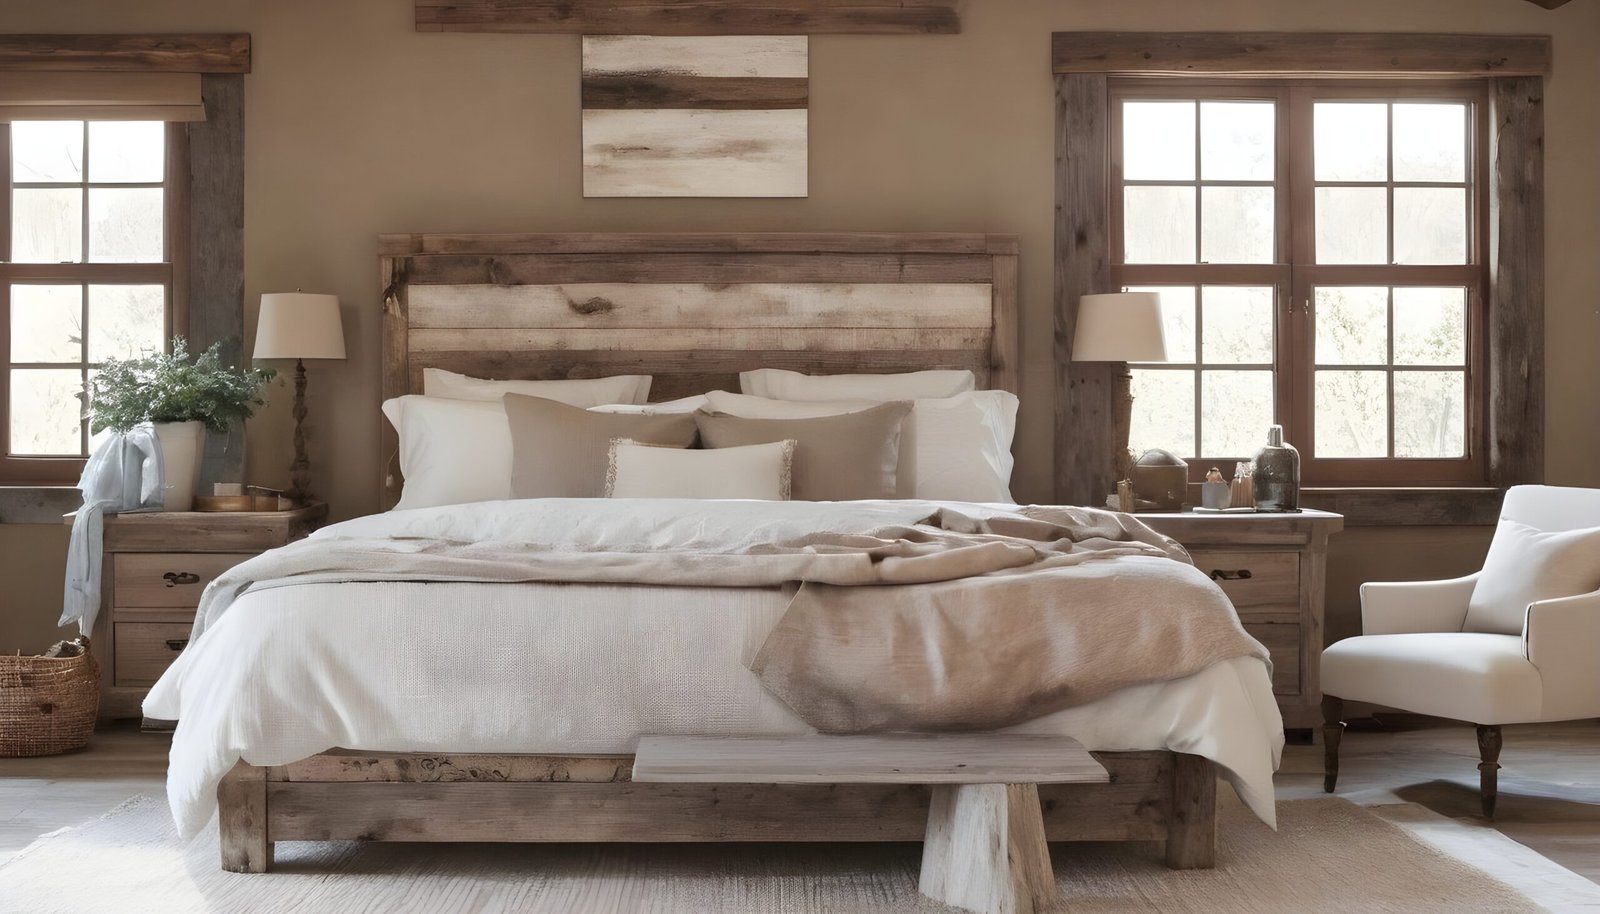 Rustic bedroom with lots of wooden accents.